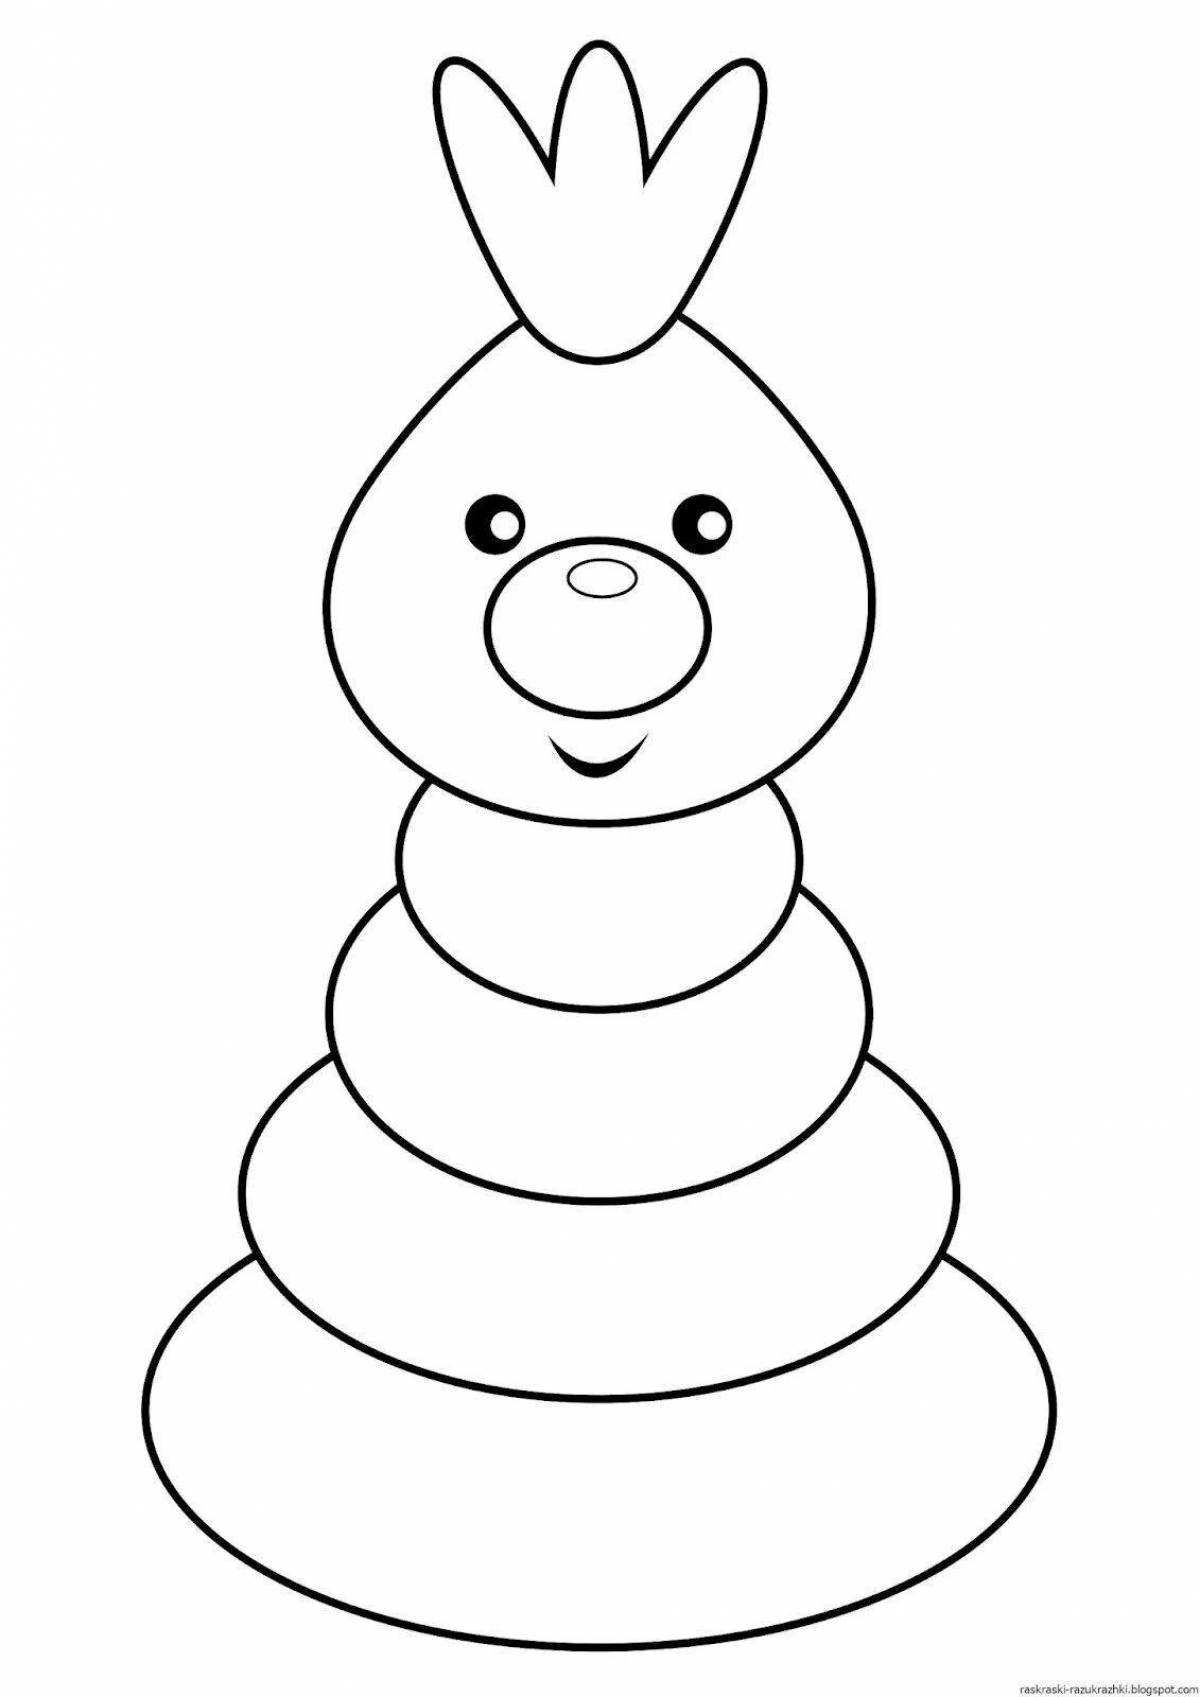 Colorful coloring game for toddlers 2-3 years old